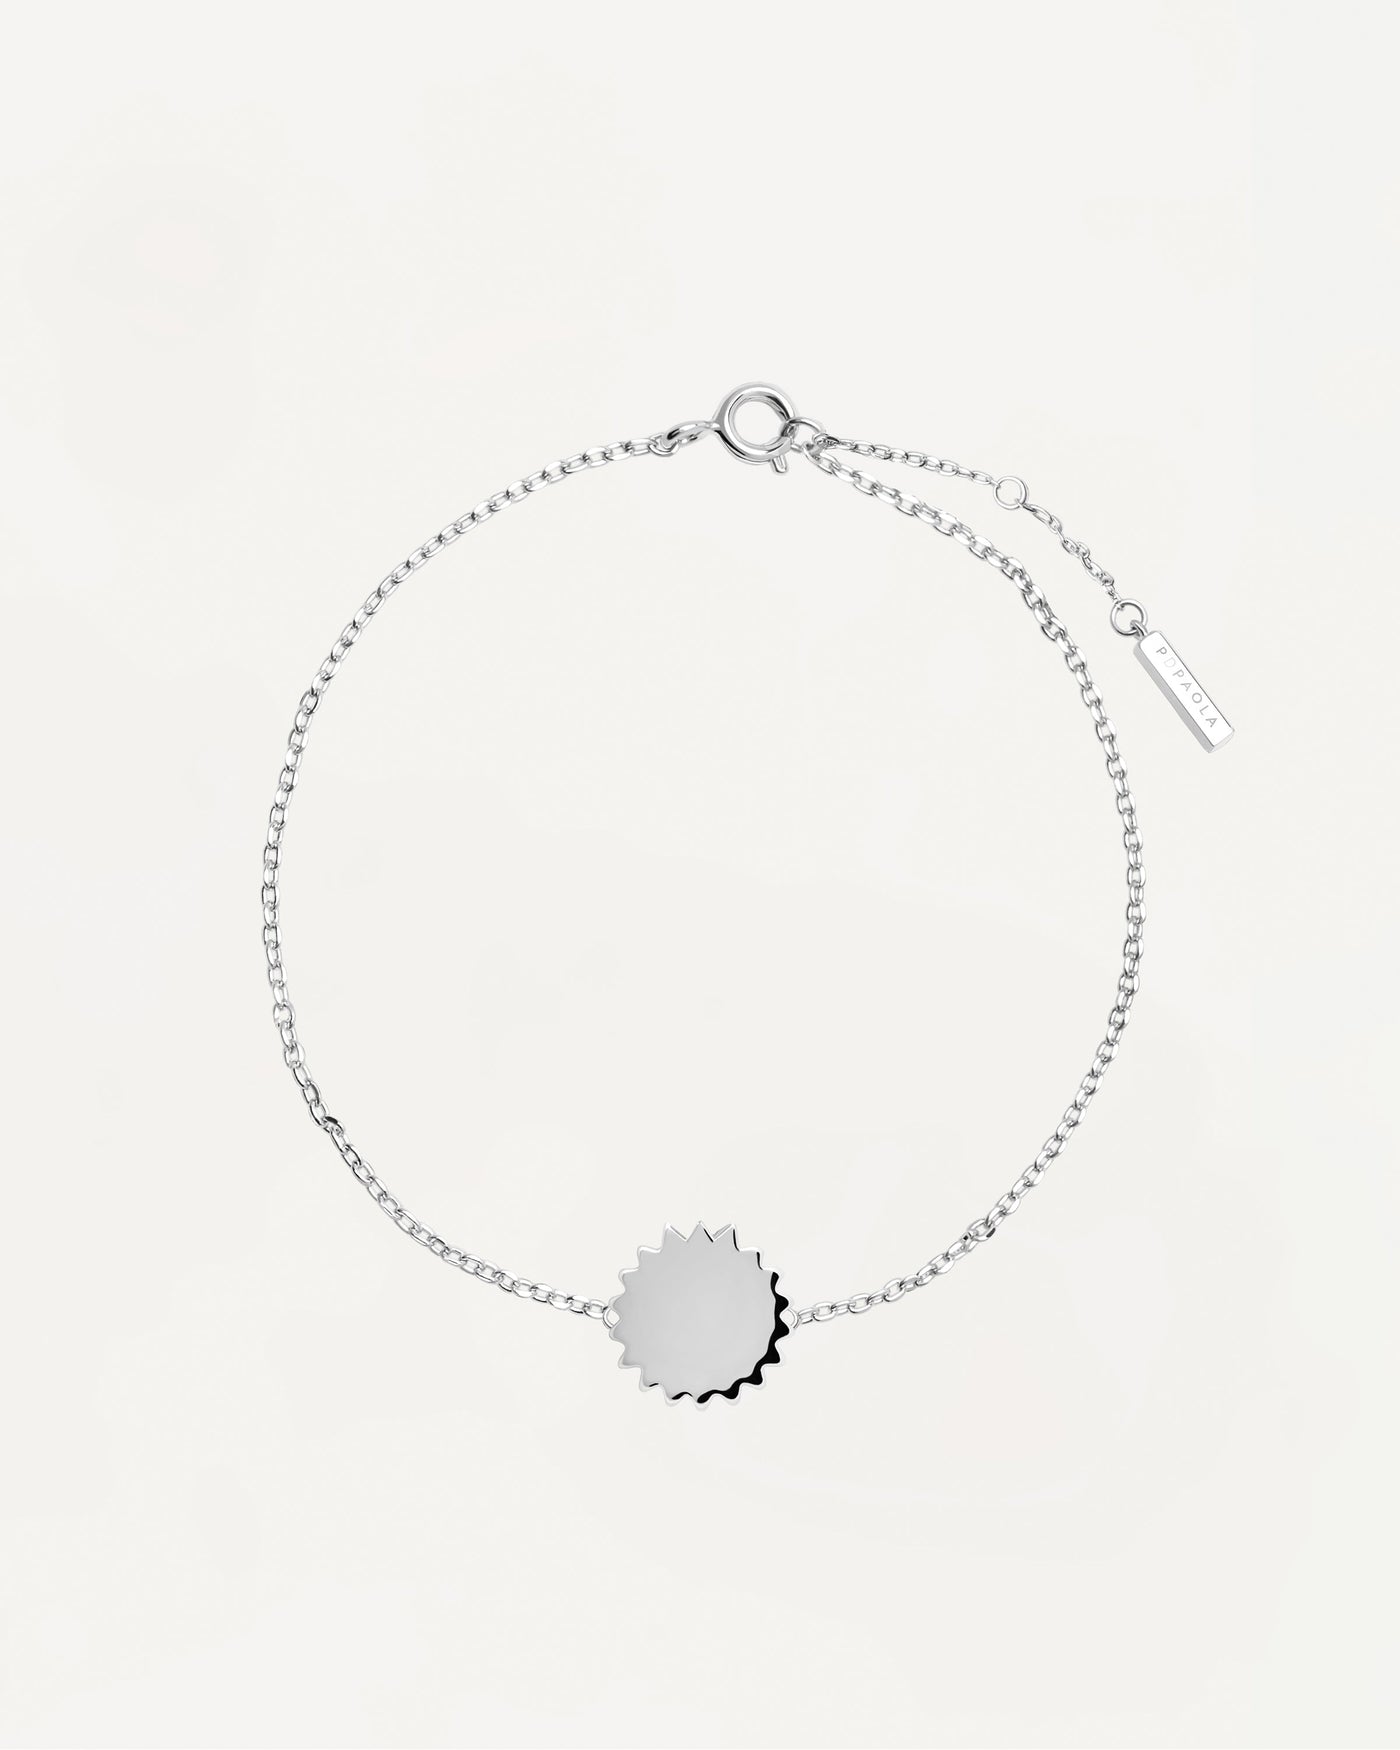 2023 Selection | New Age Silver Bracelet. Get the latest arrival from PDPAOLA. Place your order safely and get this Best Seller. Free Shipping over 40€